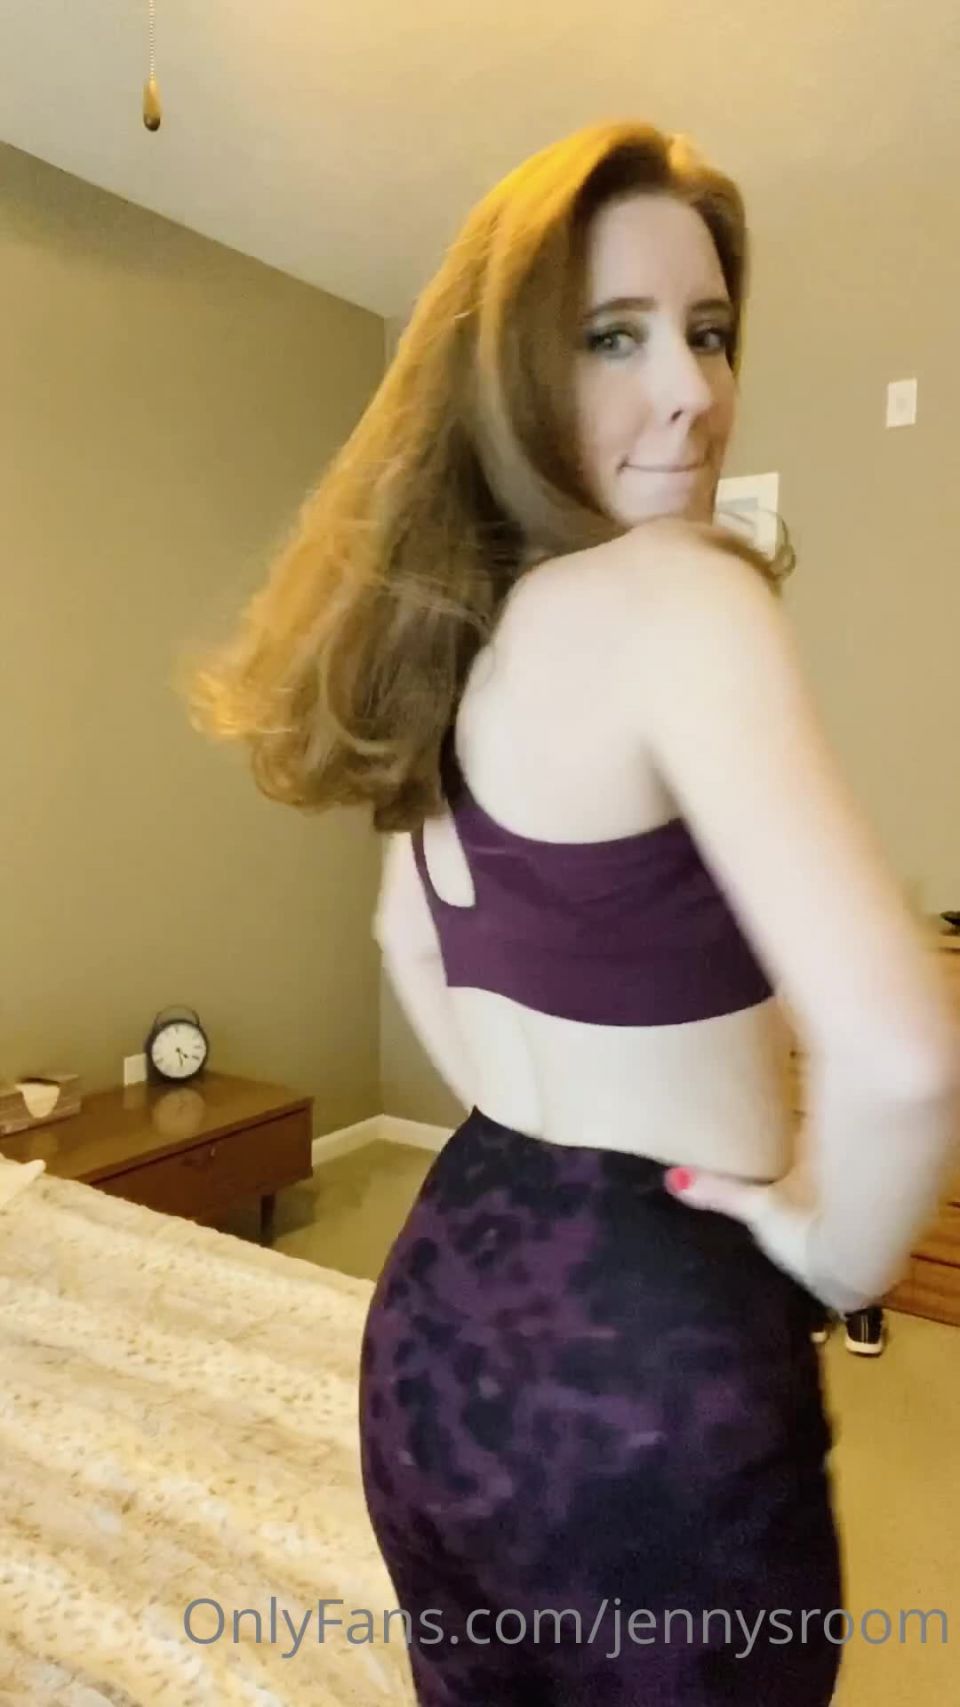 [Onlyfans] jennysroom-29-10-2020-150714381-Requested video of me working out dancing and playing 